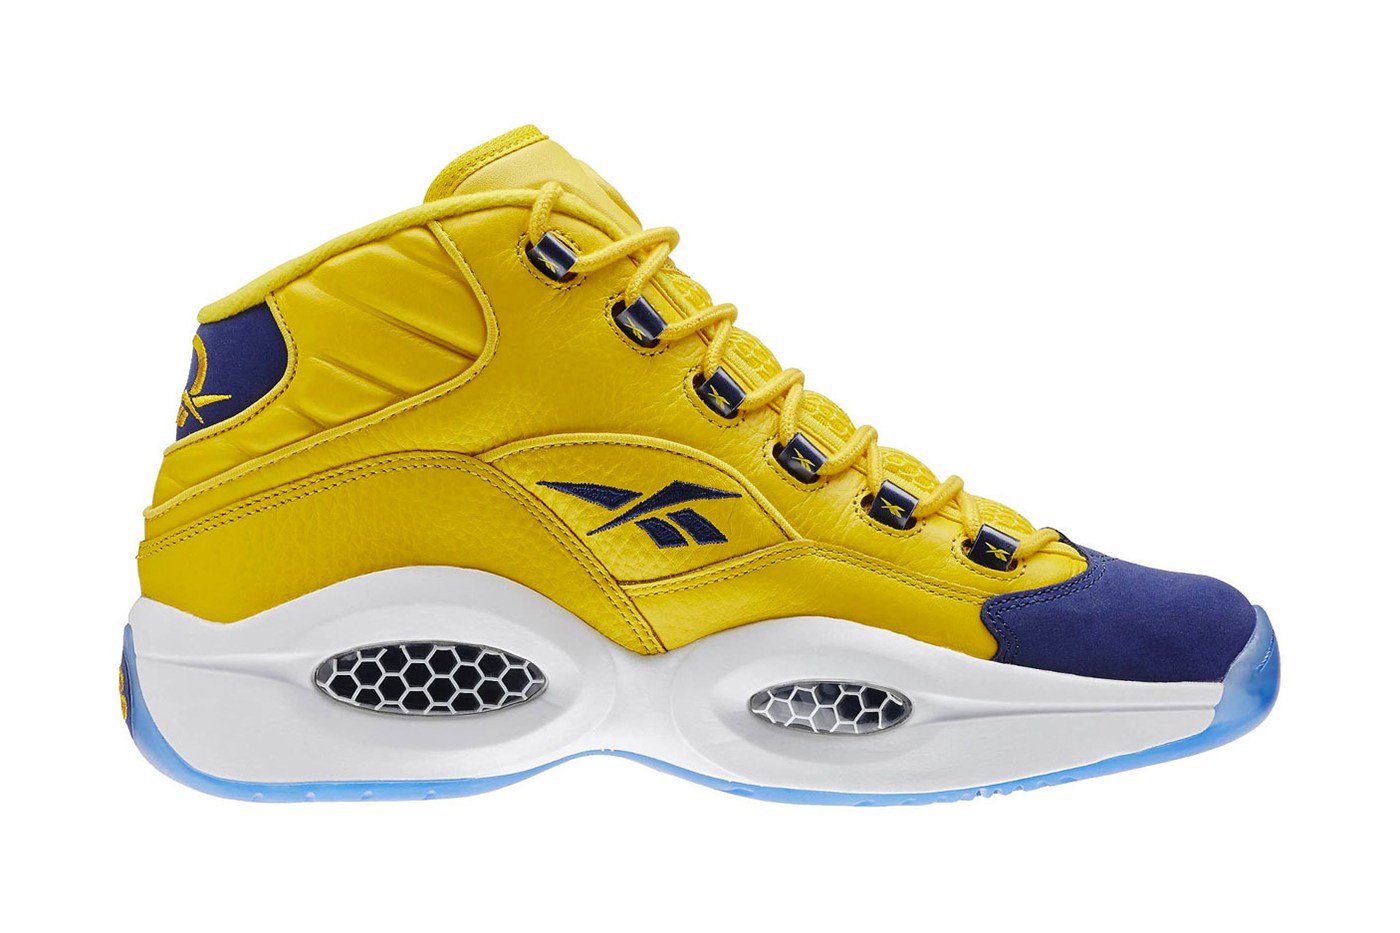 blue and white reebok questions